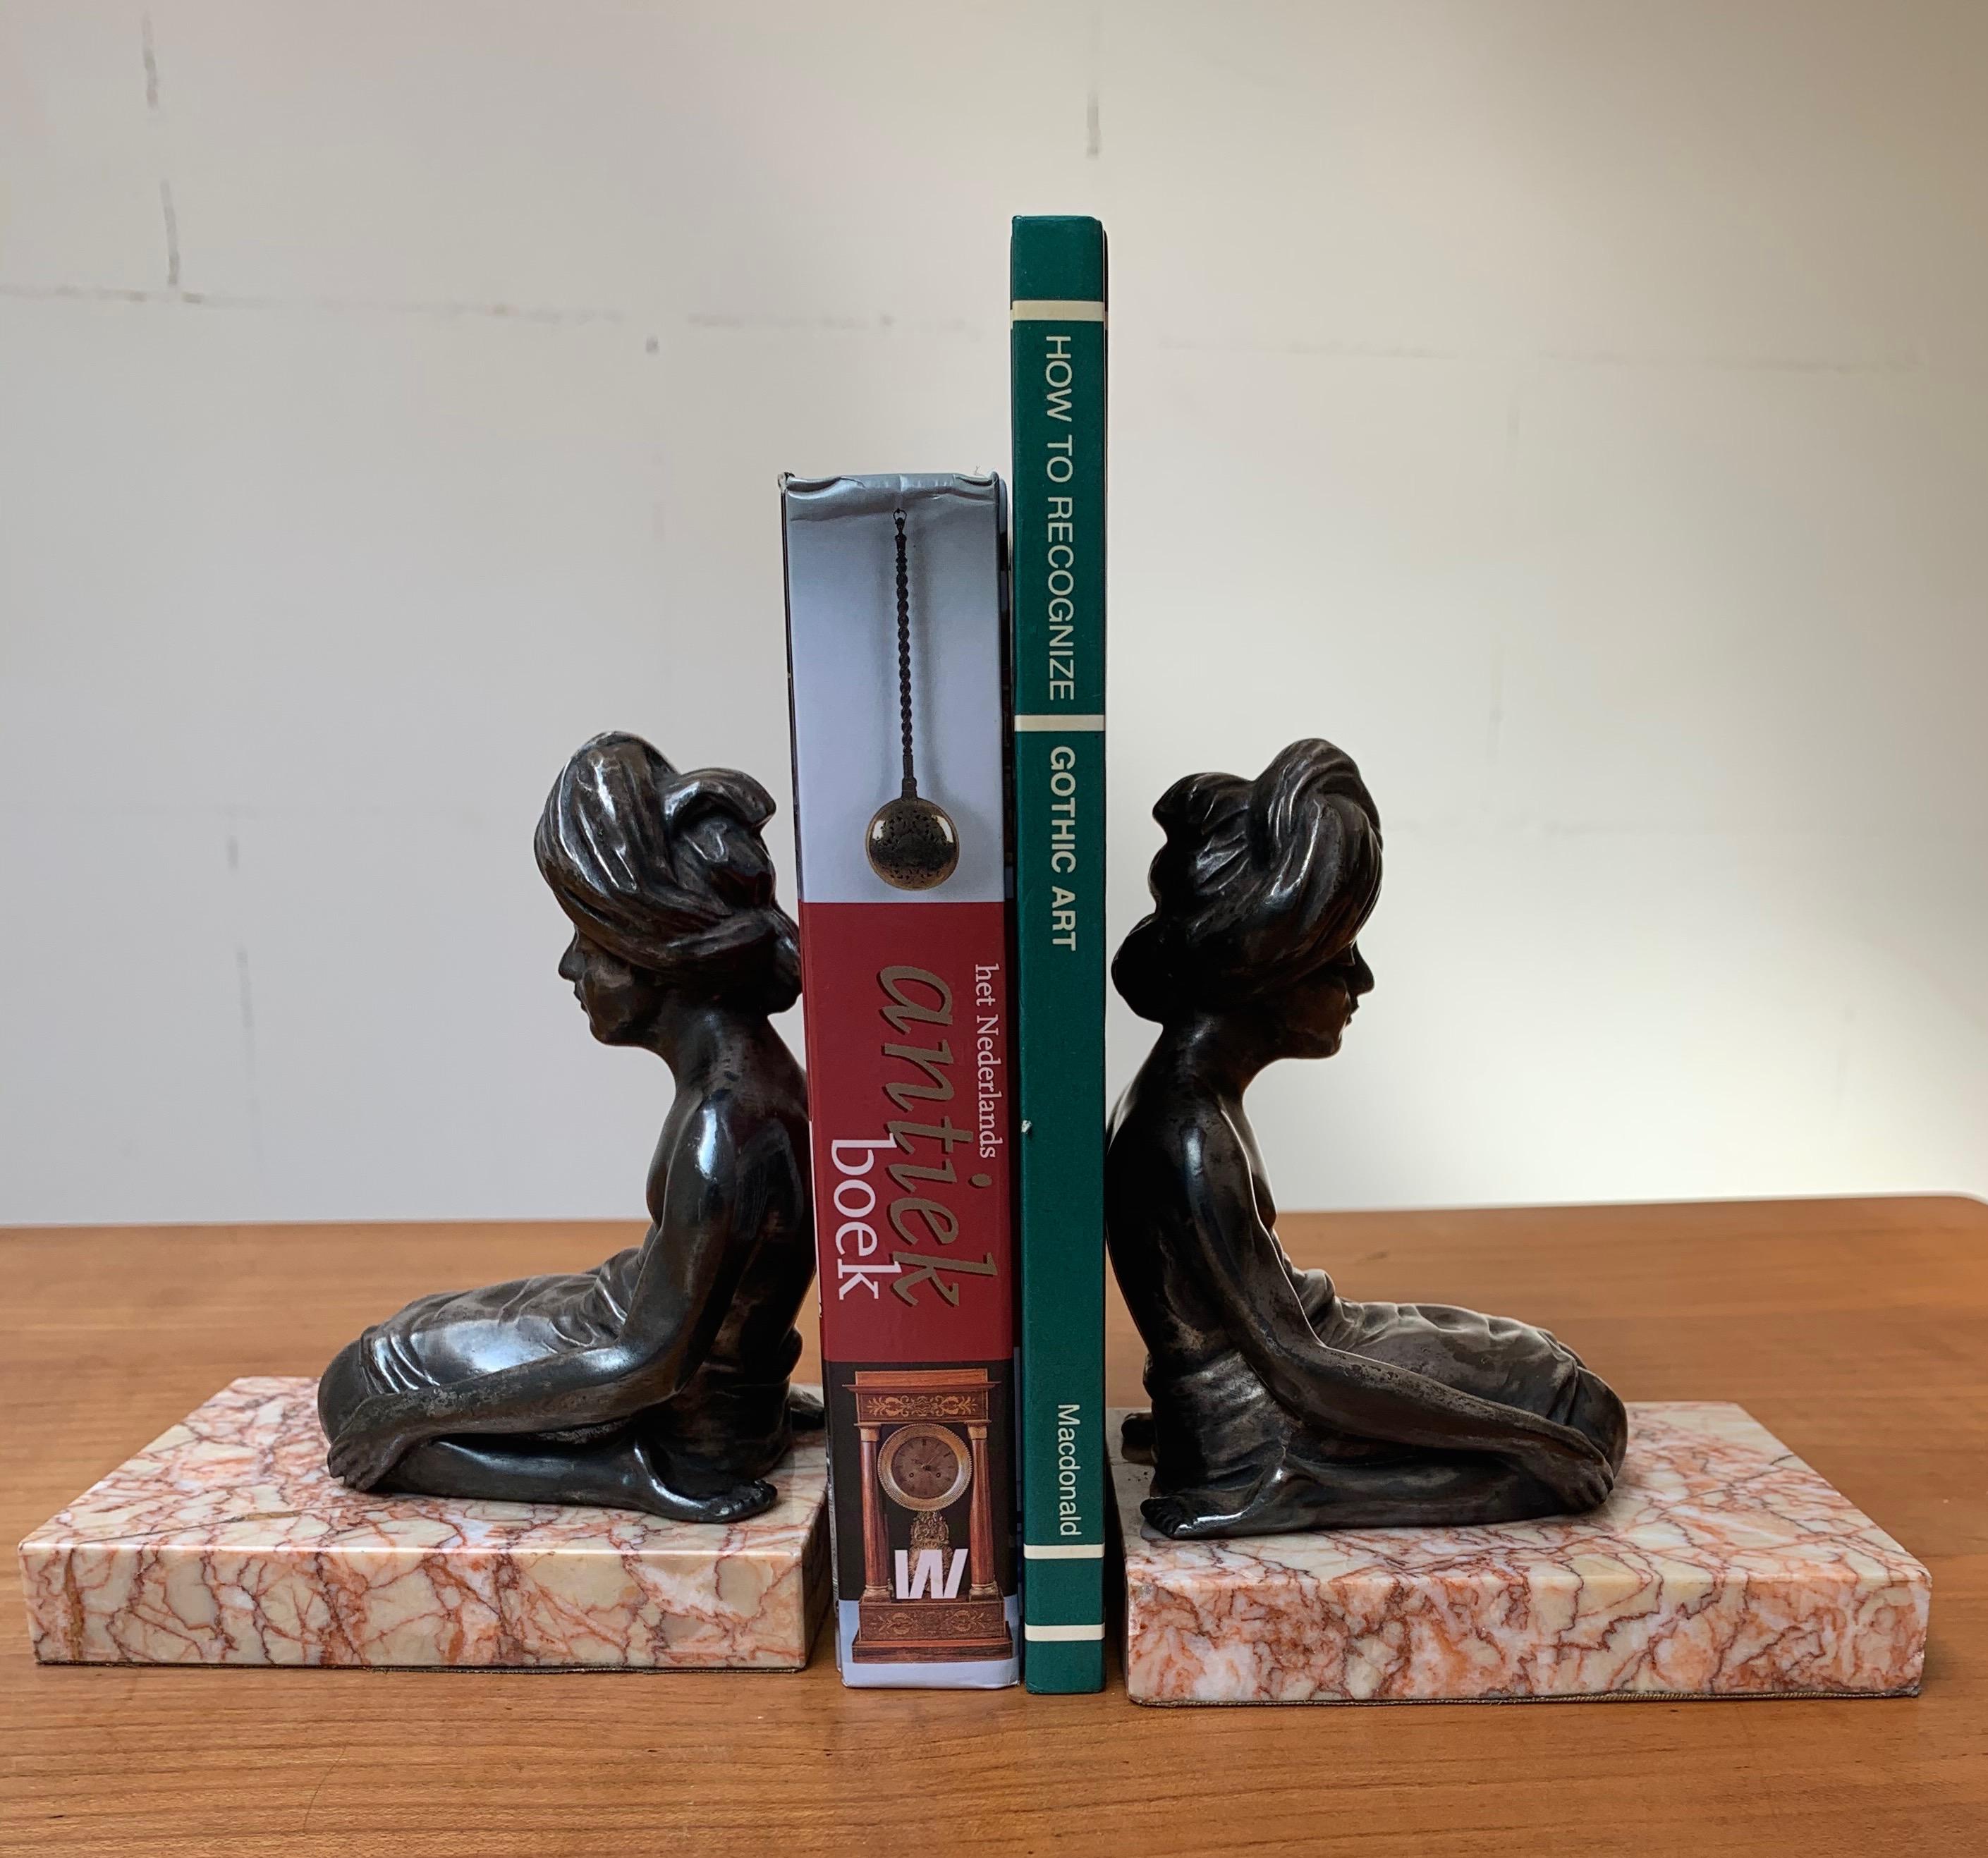 Unique on 1stdibs and possibly worldwide.

It was in the early 20th century that meditation became known in Western society. Like many artists, the one who handcrafted the sculptures that were used to create these bookends probably traveled through